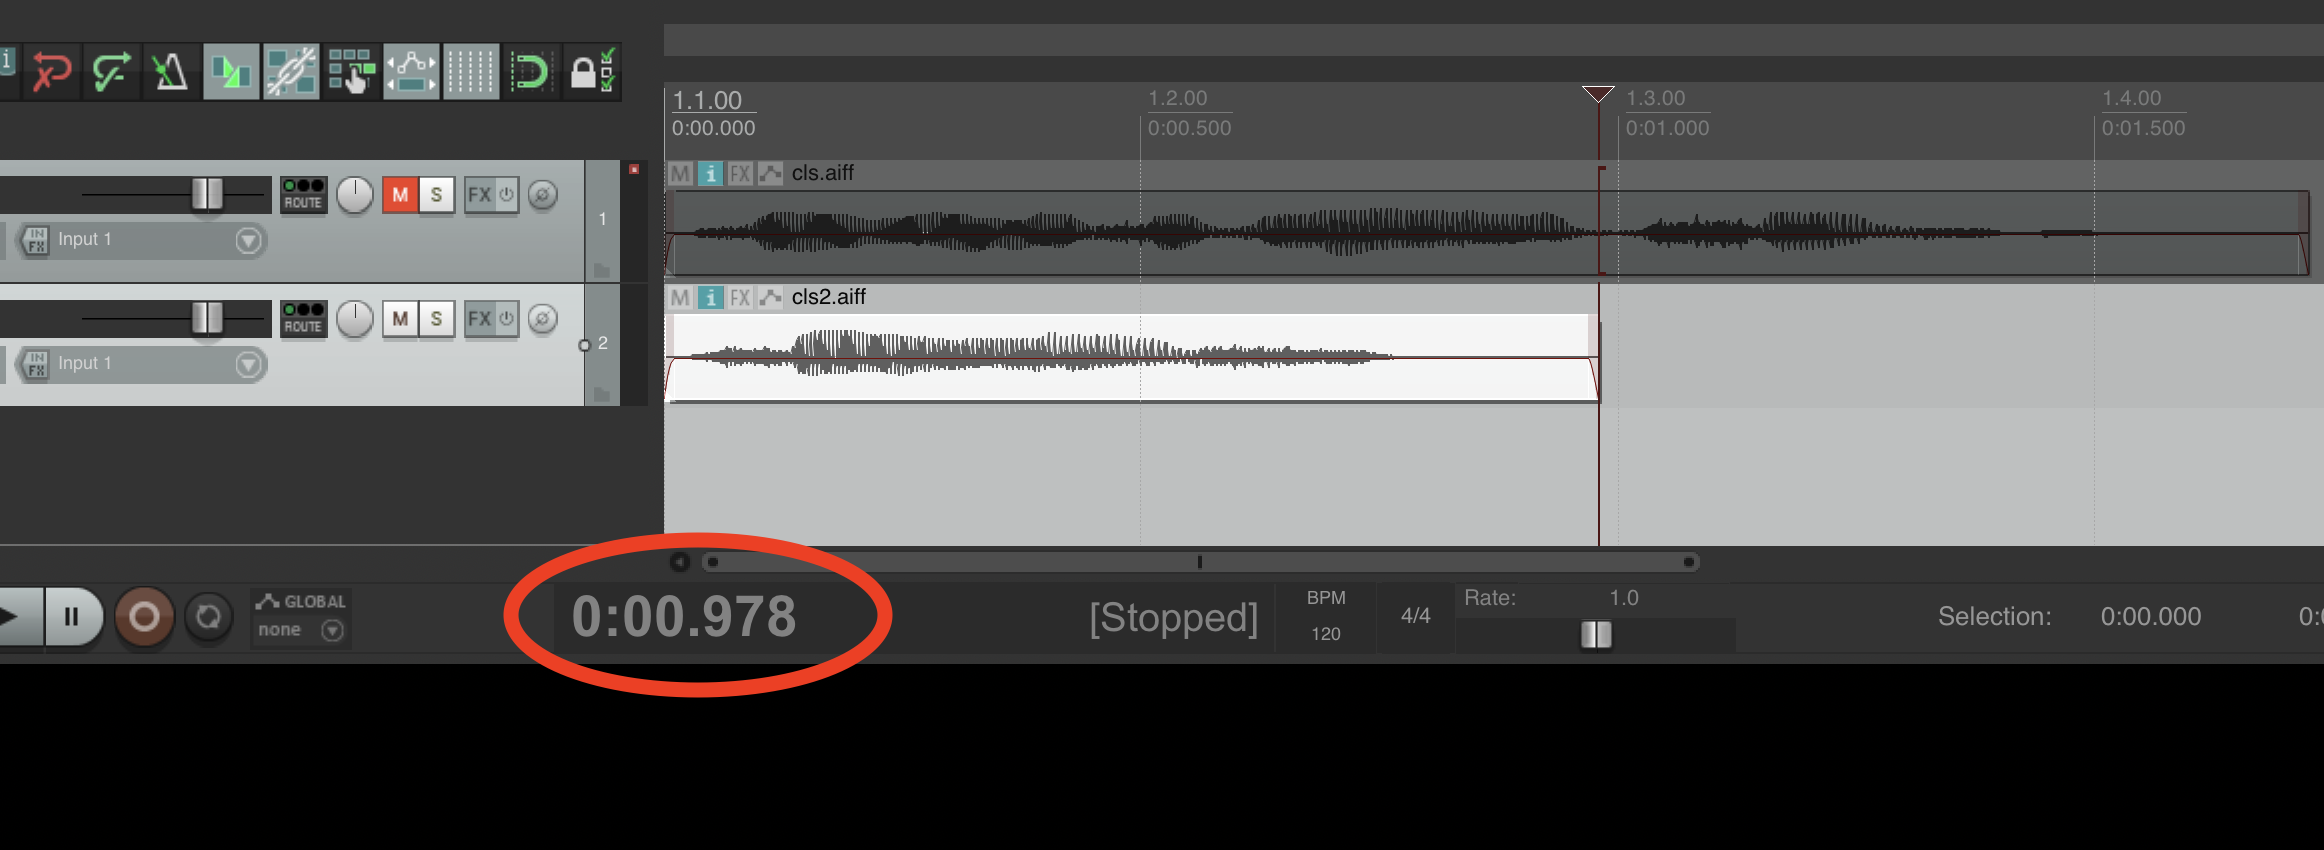 screenshot of the second audio file opened in Reaper